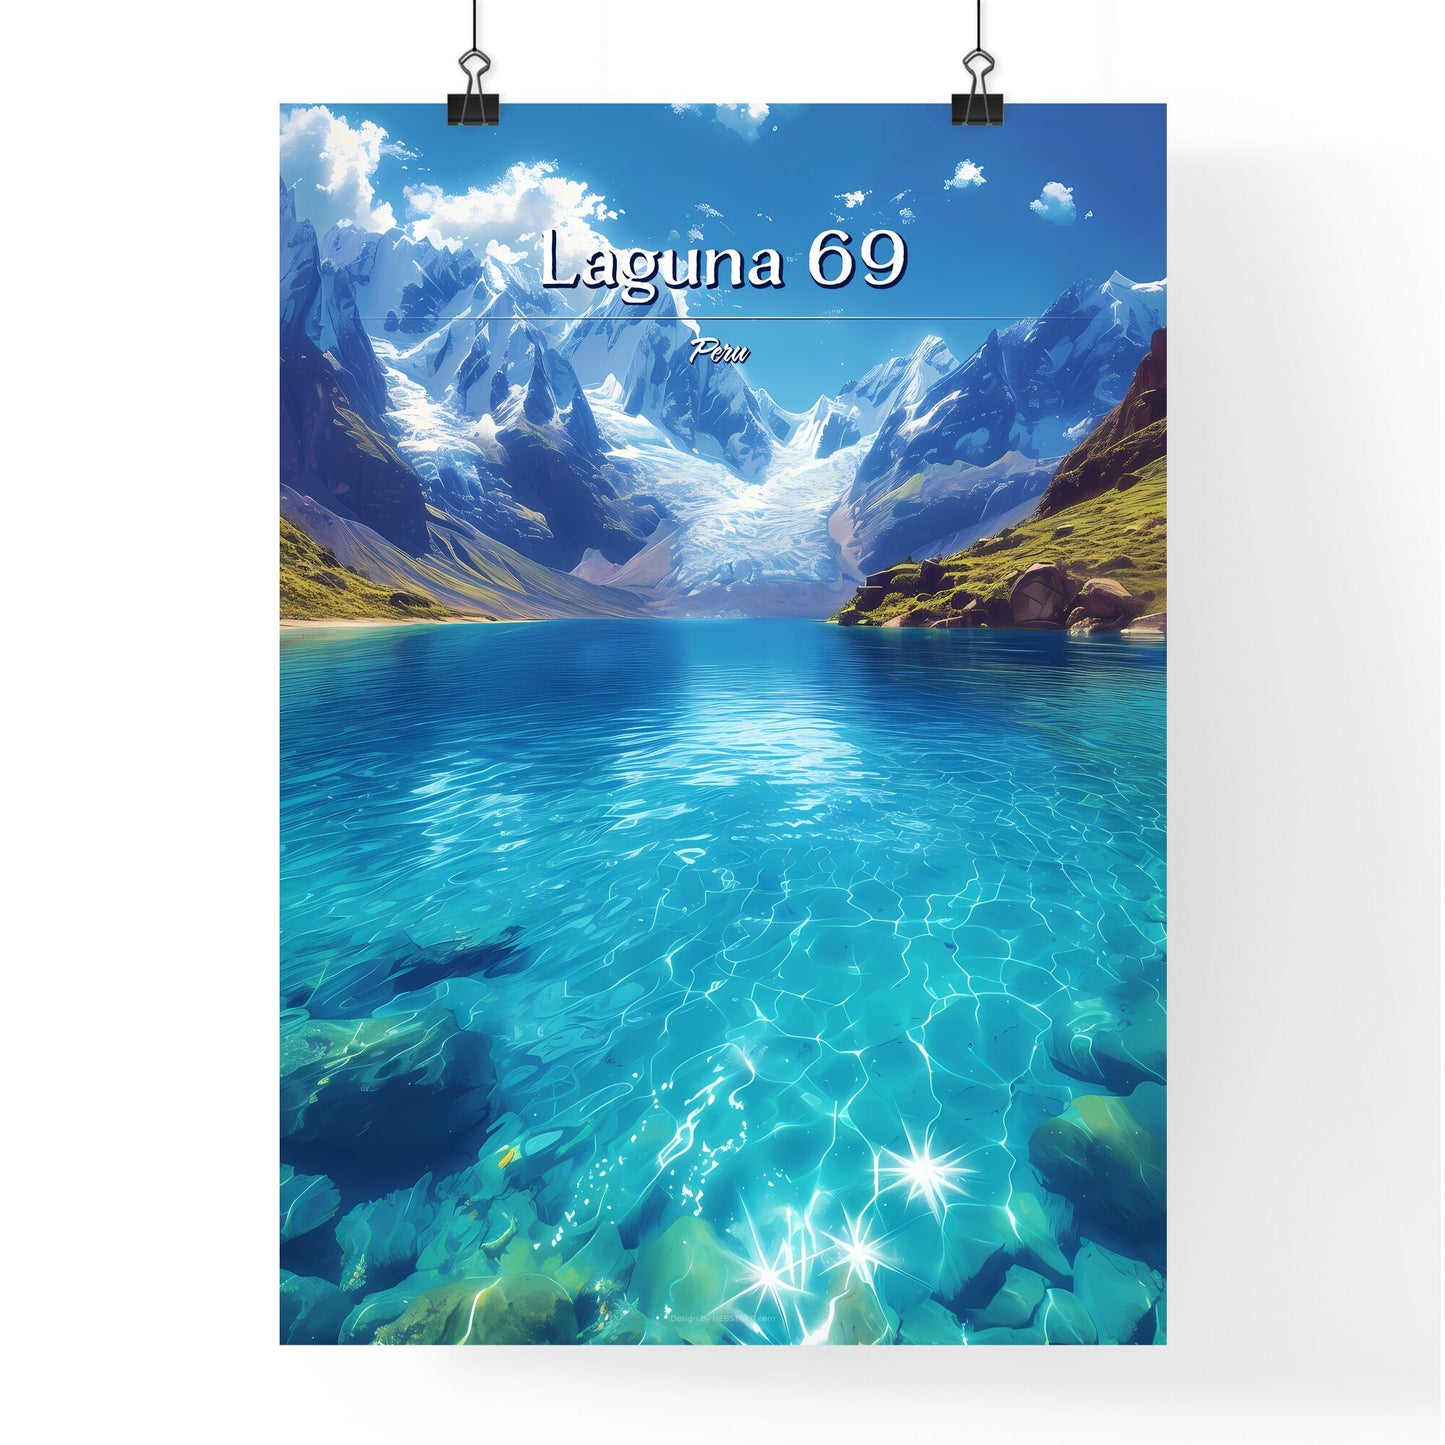 Laguna 69, Peru - Art print of a lake surrounded by mountains Default Title